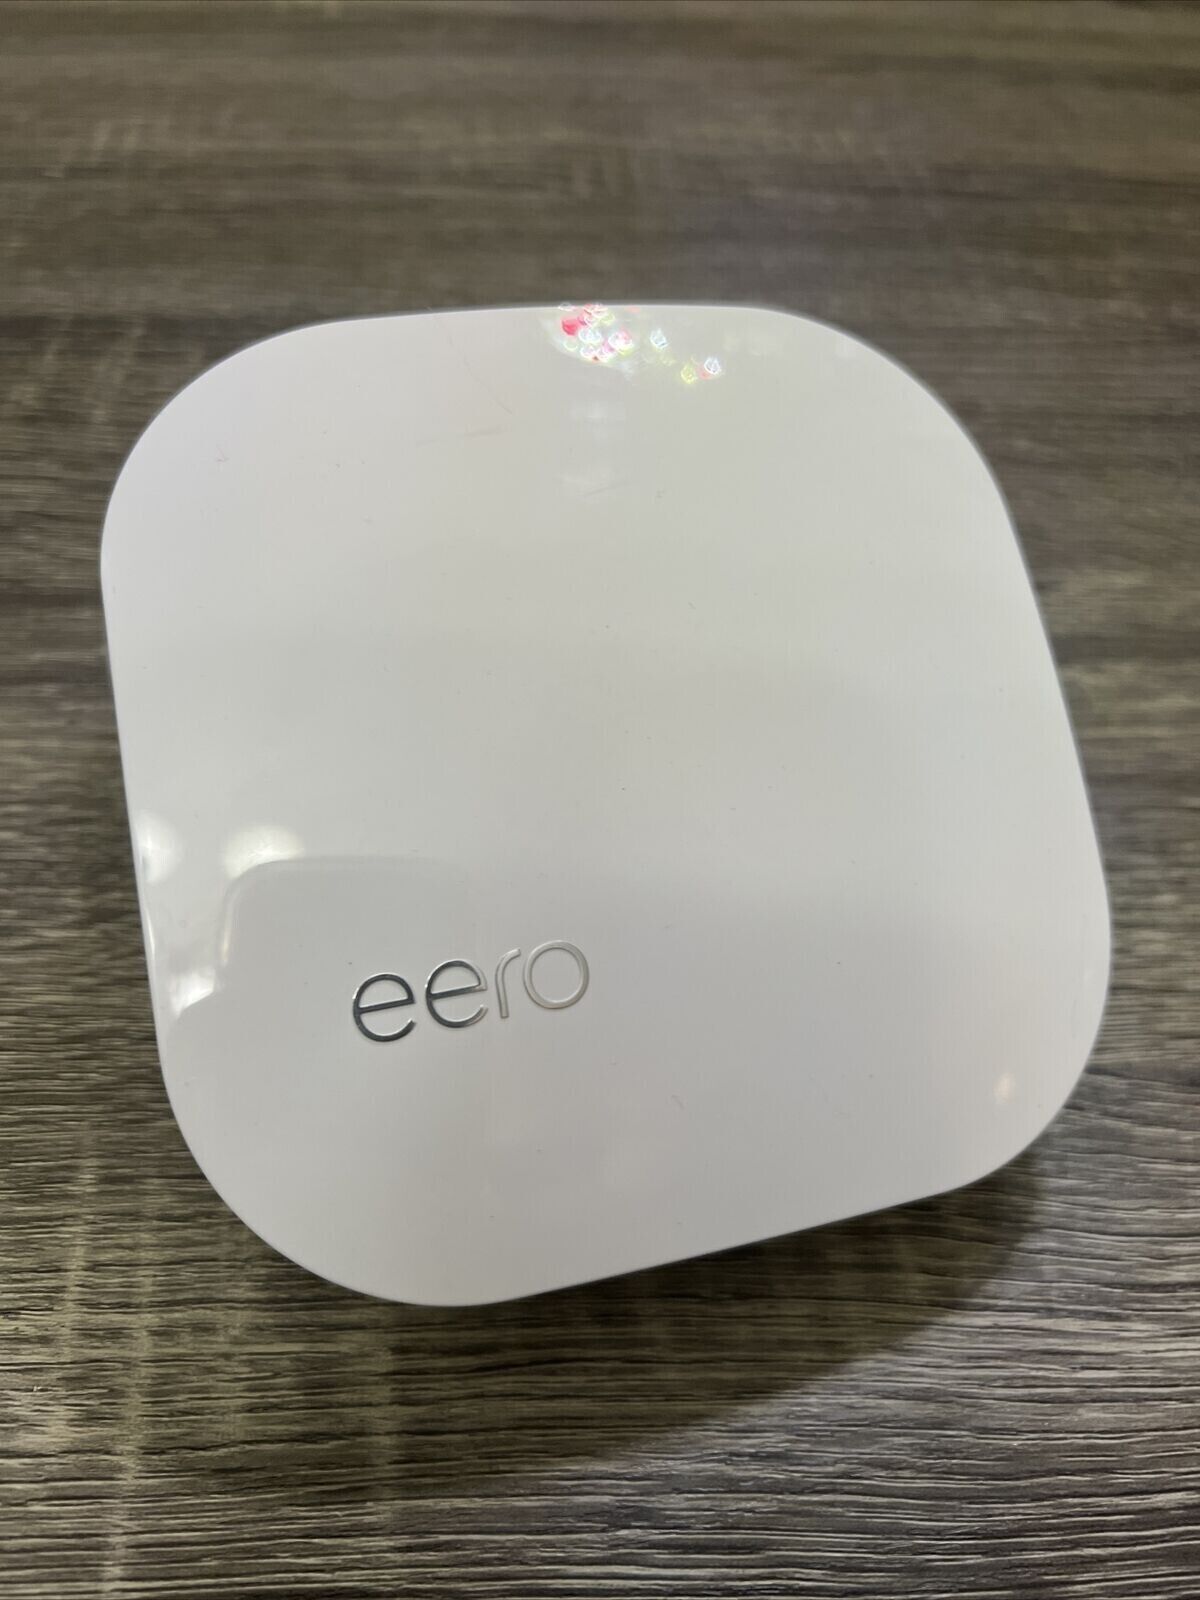 Eero Pro Fast reliable Wi-Fi AC speeds up to 350 Mbps